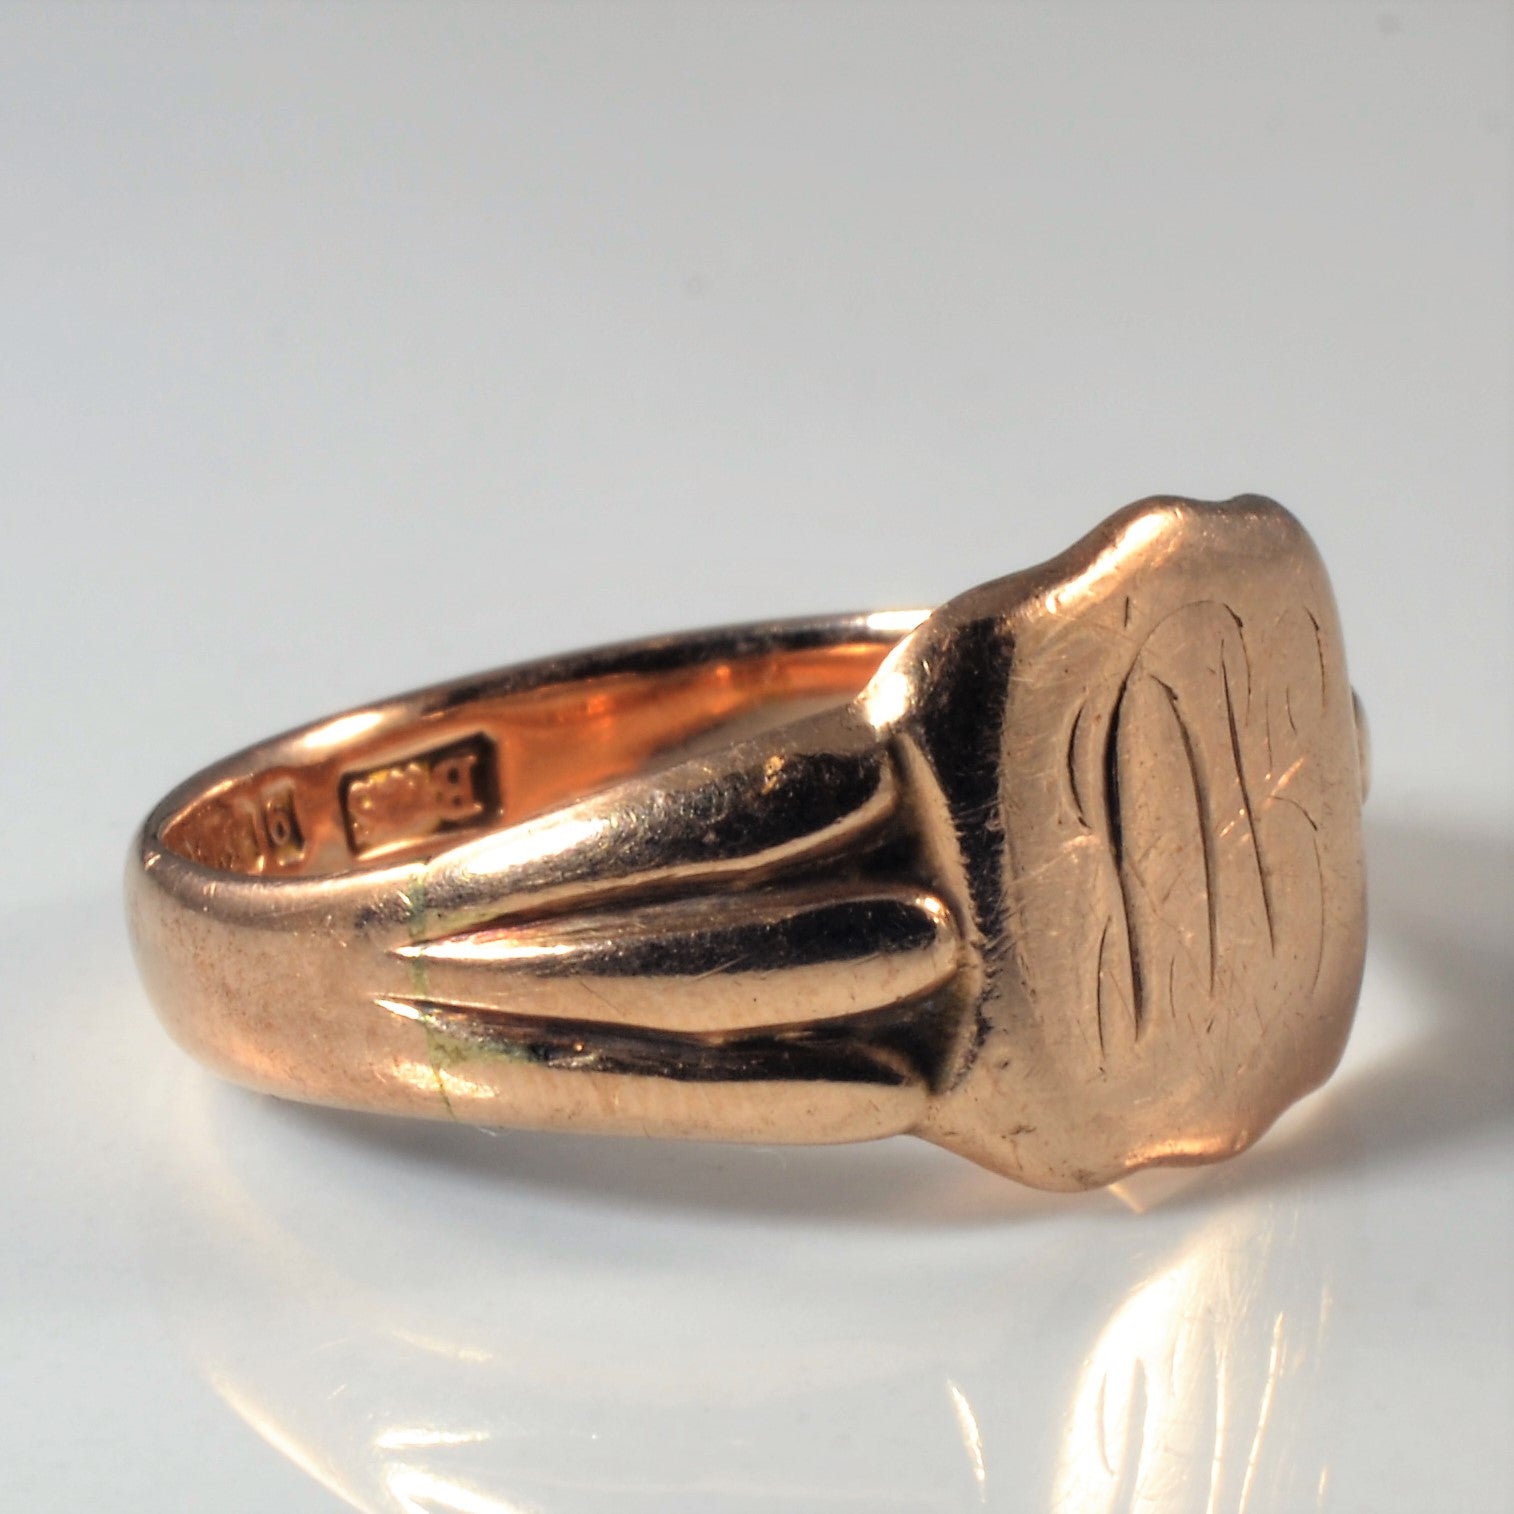 Engraved Initial 'MB' Signet Ring | SZ 8.25 |